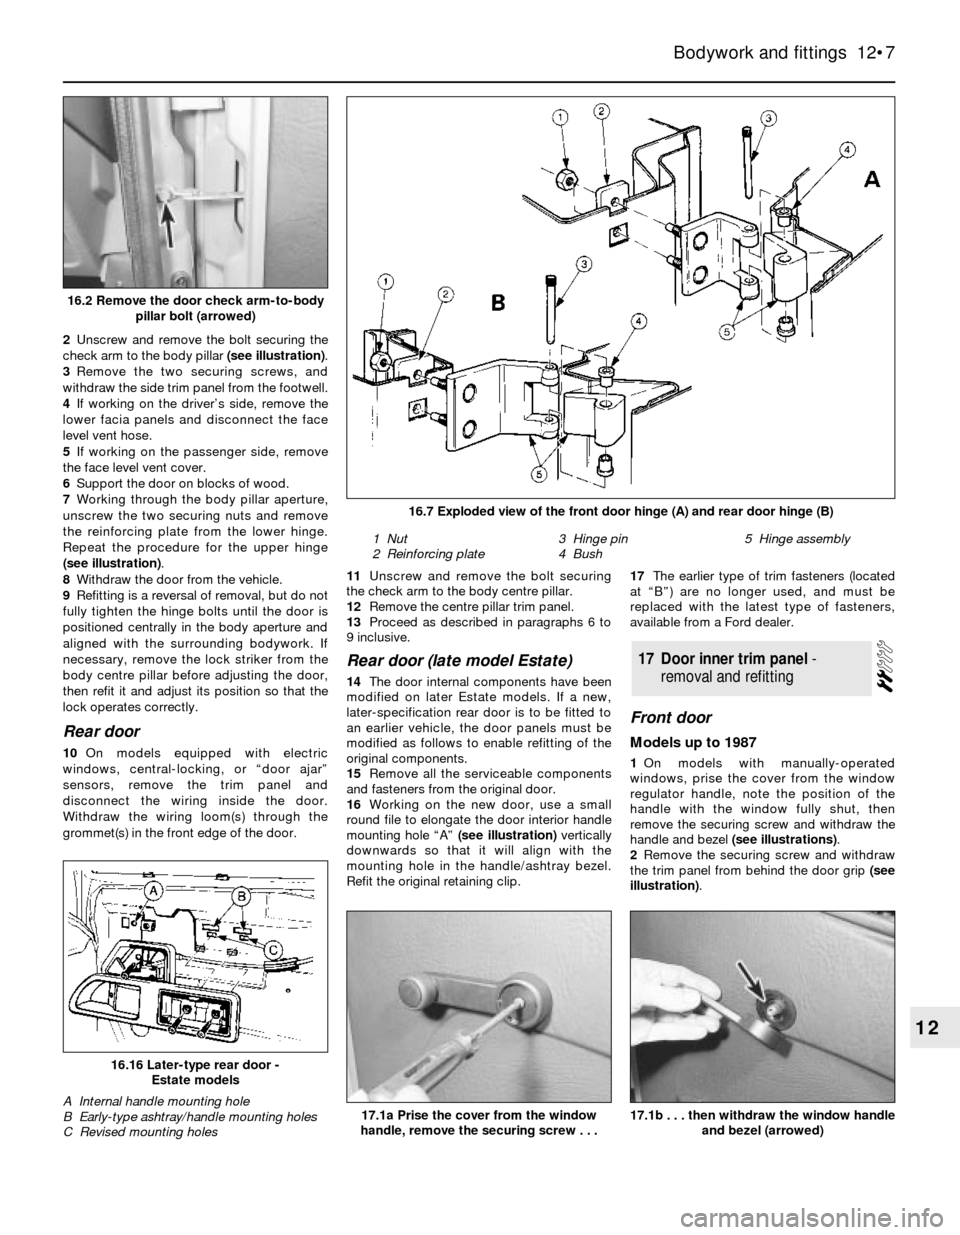 FORD SIERRA 1991 2.G Bodywork And Fittings Workshop Manual 2Unscrew and remove the bolt securing the
check arm to the body pillar (see illustration). 
3Remove the two securing screws, and
withdraw the side trim panel from the footwell. 
4If working on the dri